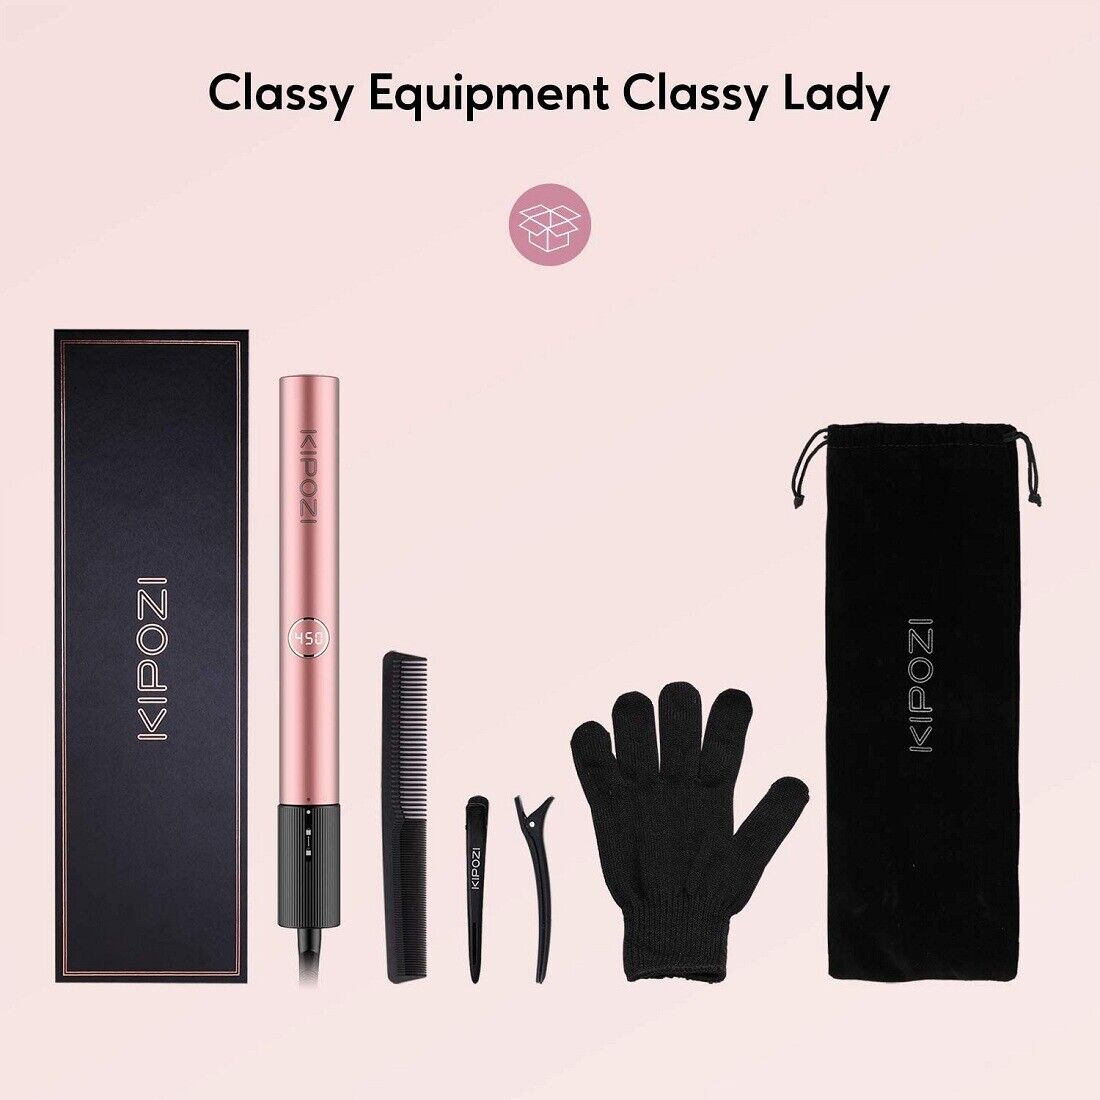 Pro KIPOZI Curly Straight Hair Straightener 2 In 1 Wide Plate LCD Display 1.75In KIPOZI Does Not Apply - фотография #3